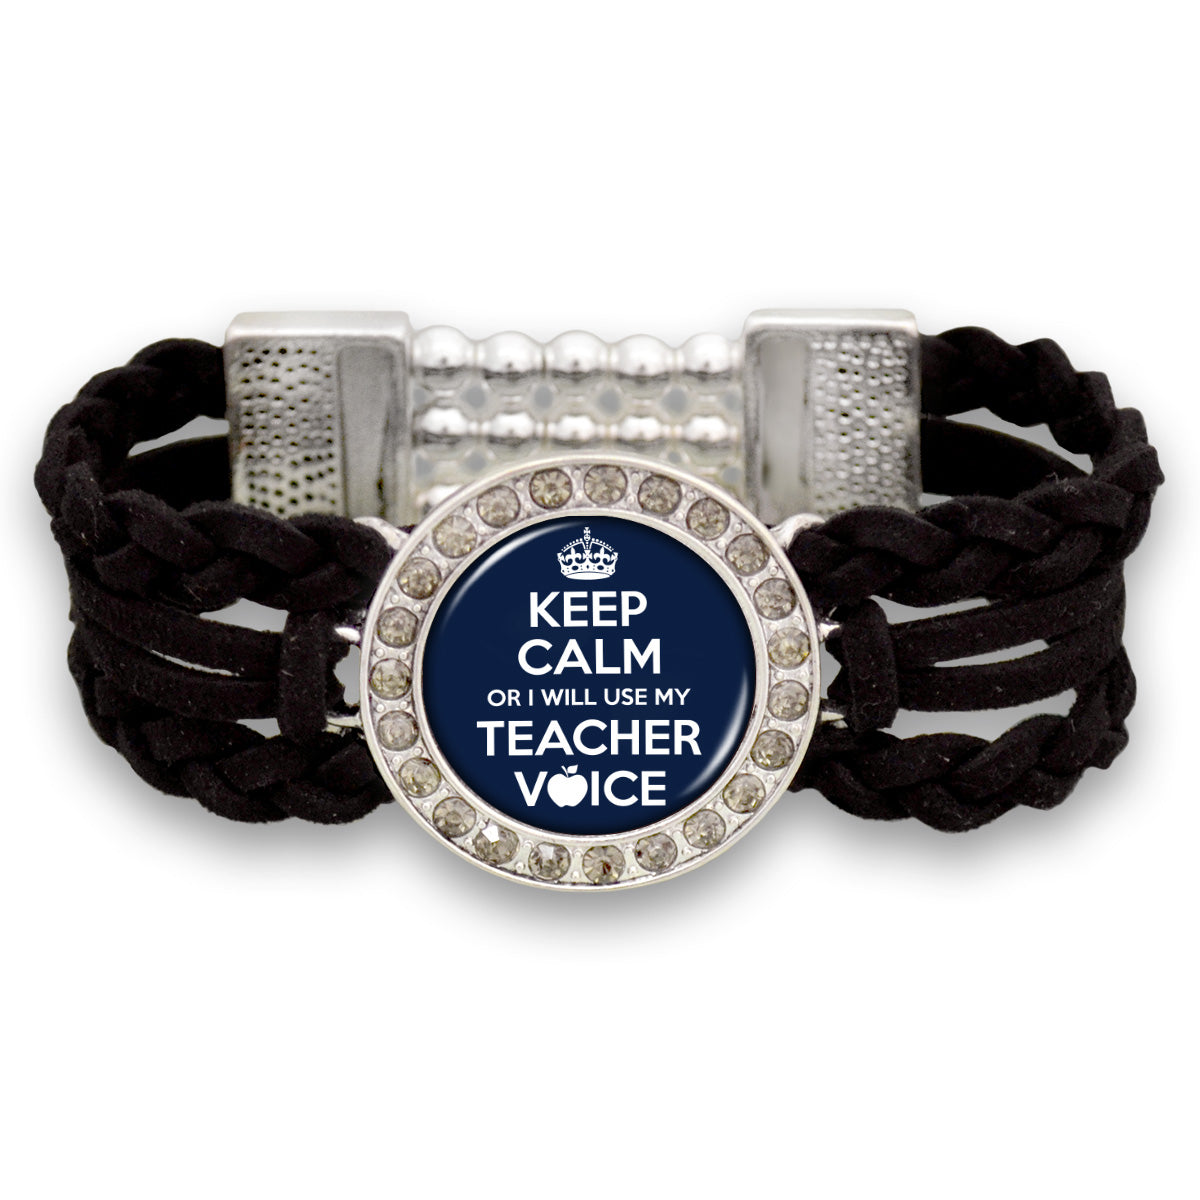 "Keep Calm Or I Will Use My Teacher Voice" Outdoors Suede Stretch Bracelet